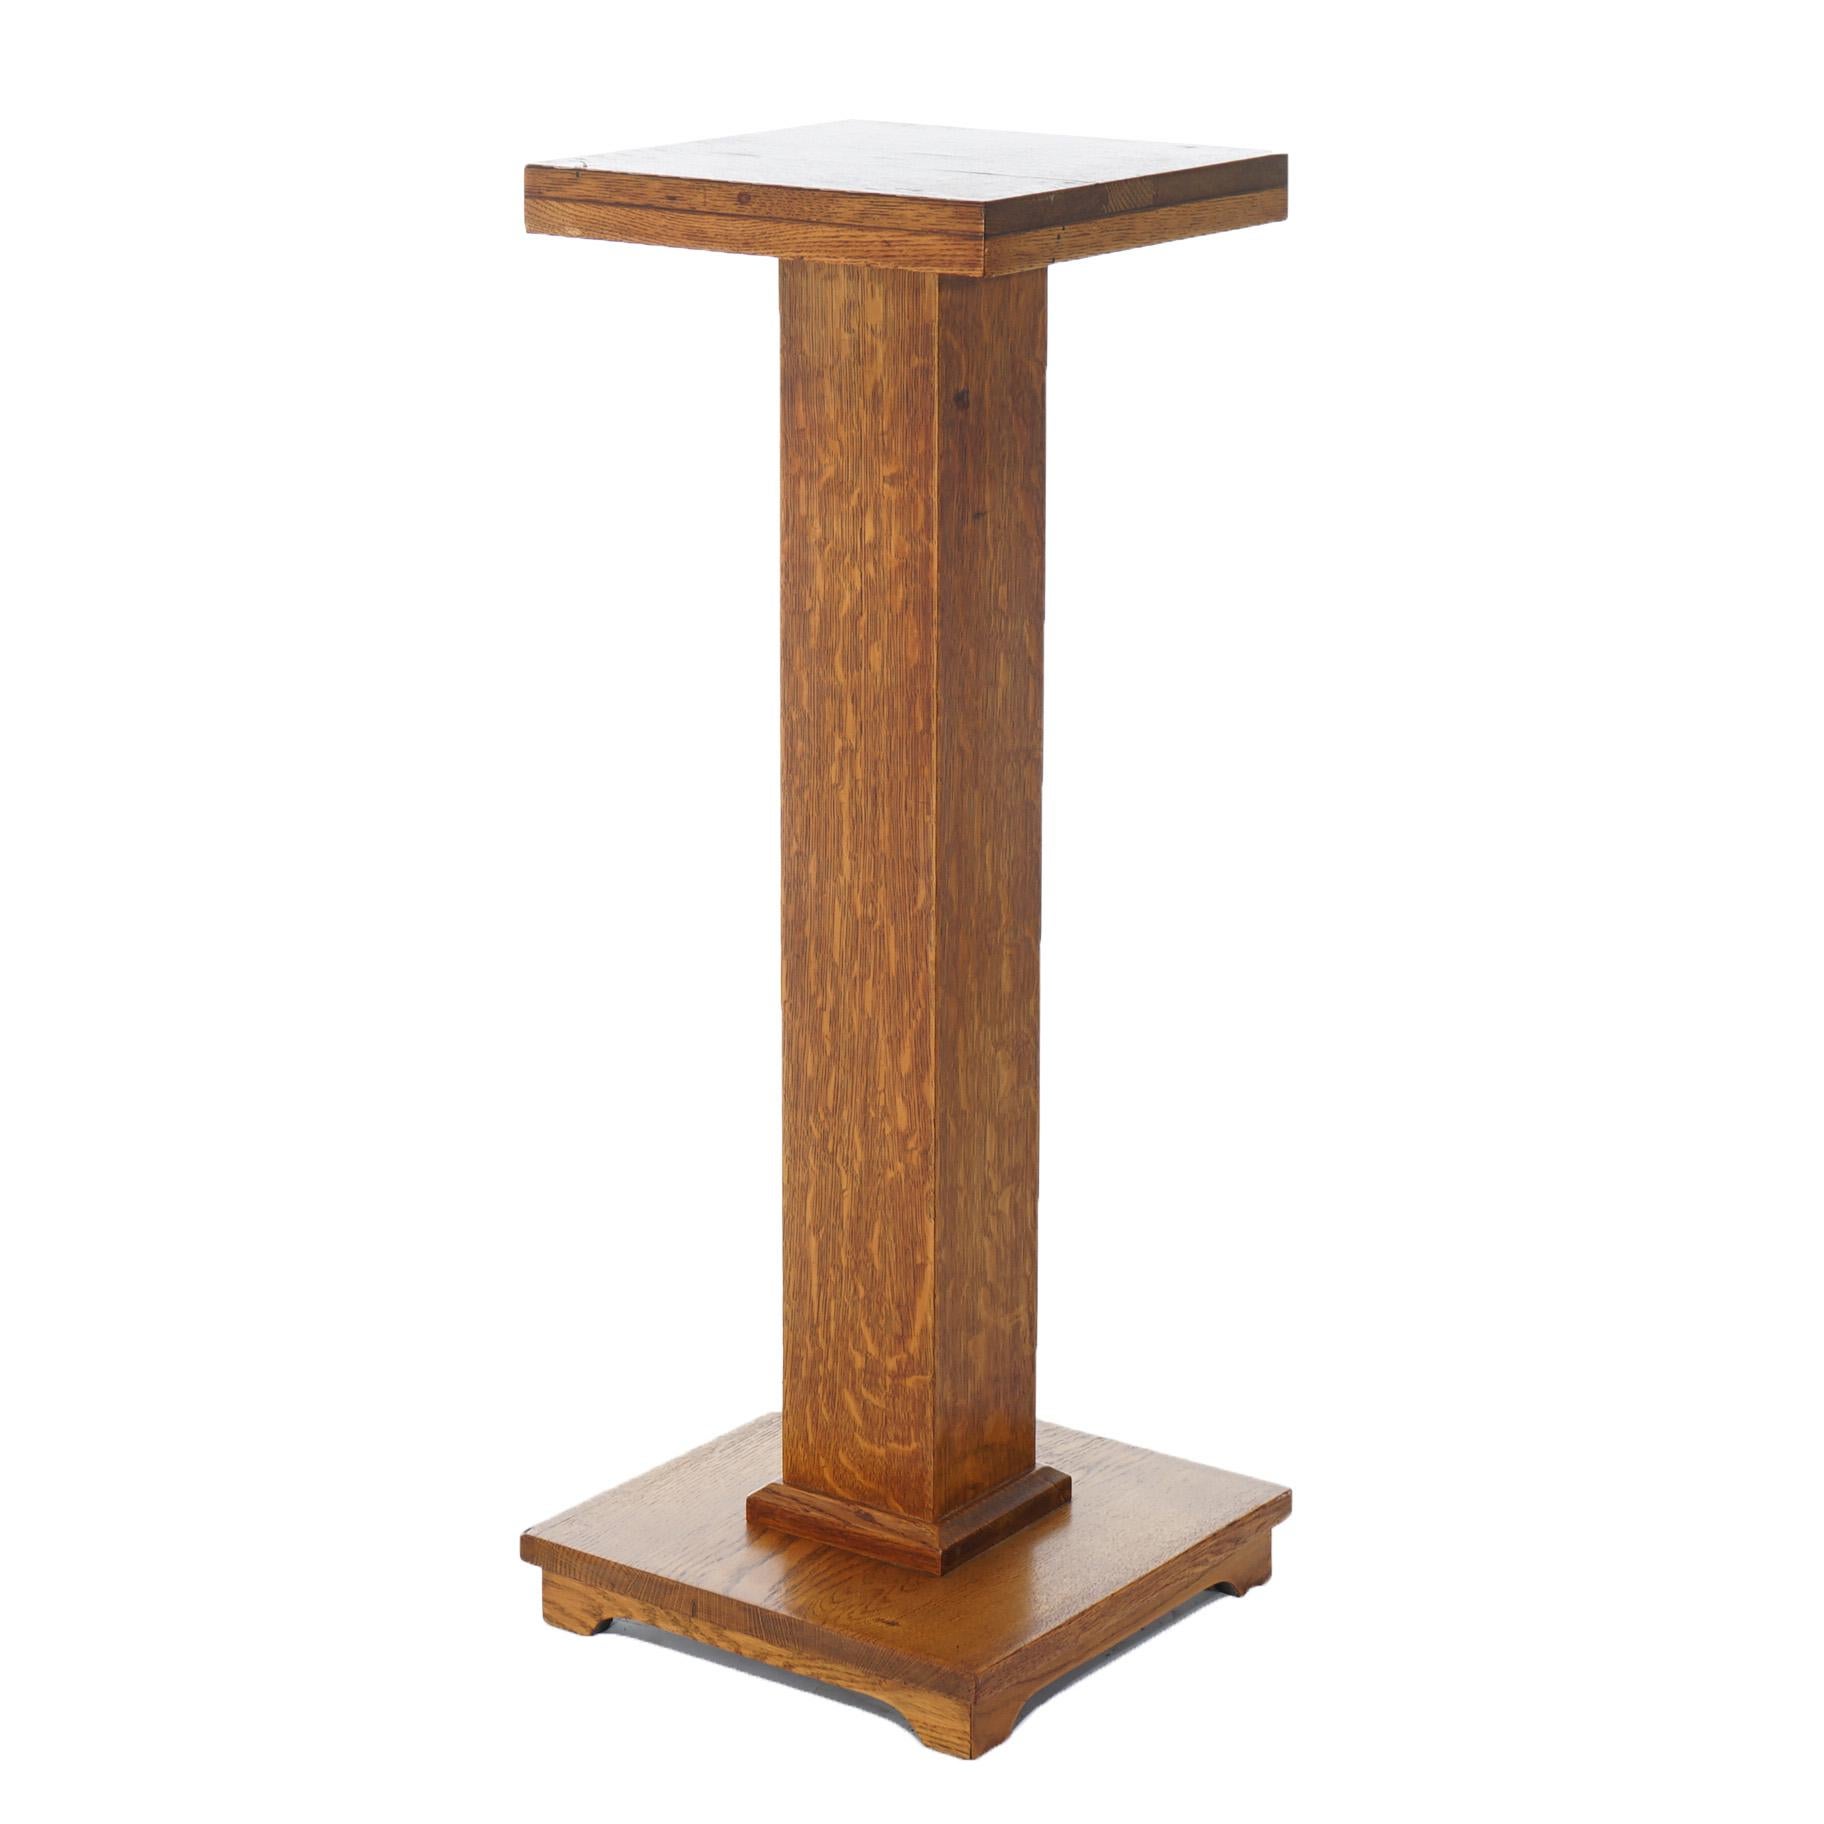 An antique Arts and Crafts Mission plant stand offers quarter sawn oak construction with square display and footed base, c1910

Measures- 36.75''H x 14''W x 14''D 